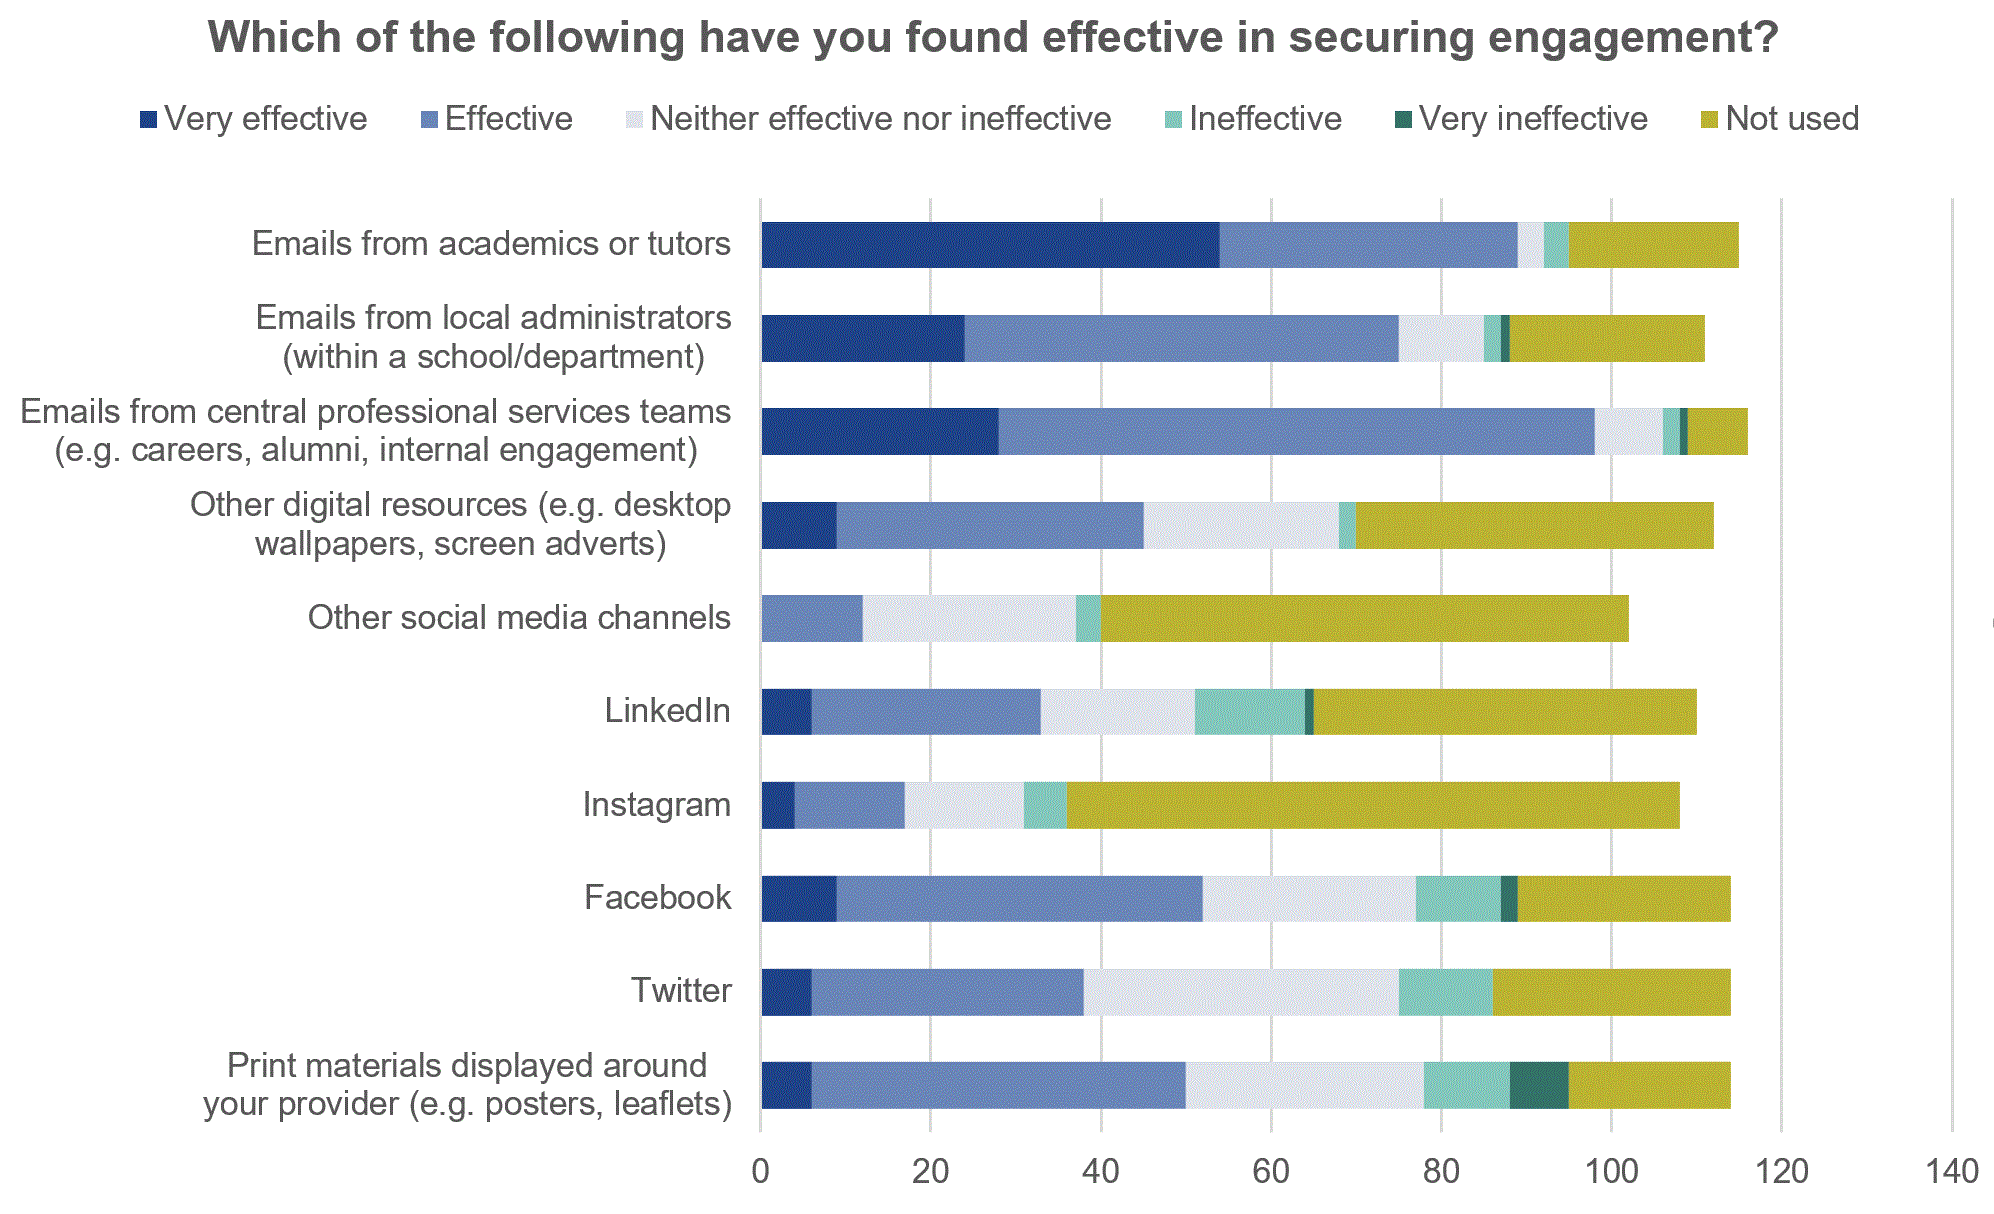 Chart 2 - Which of the following have you found effective in securing engagement?